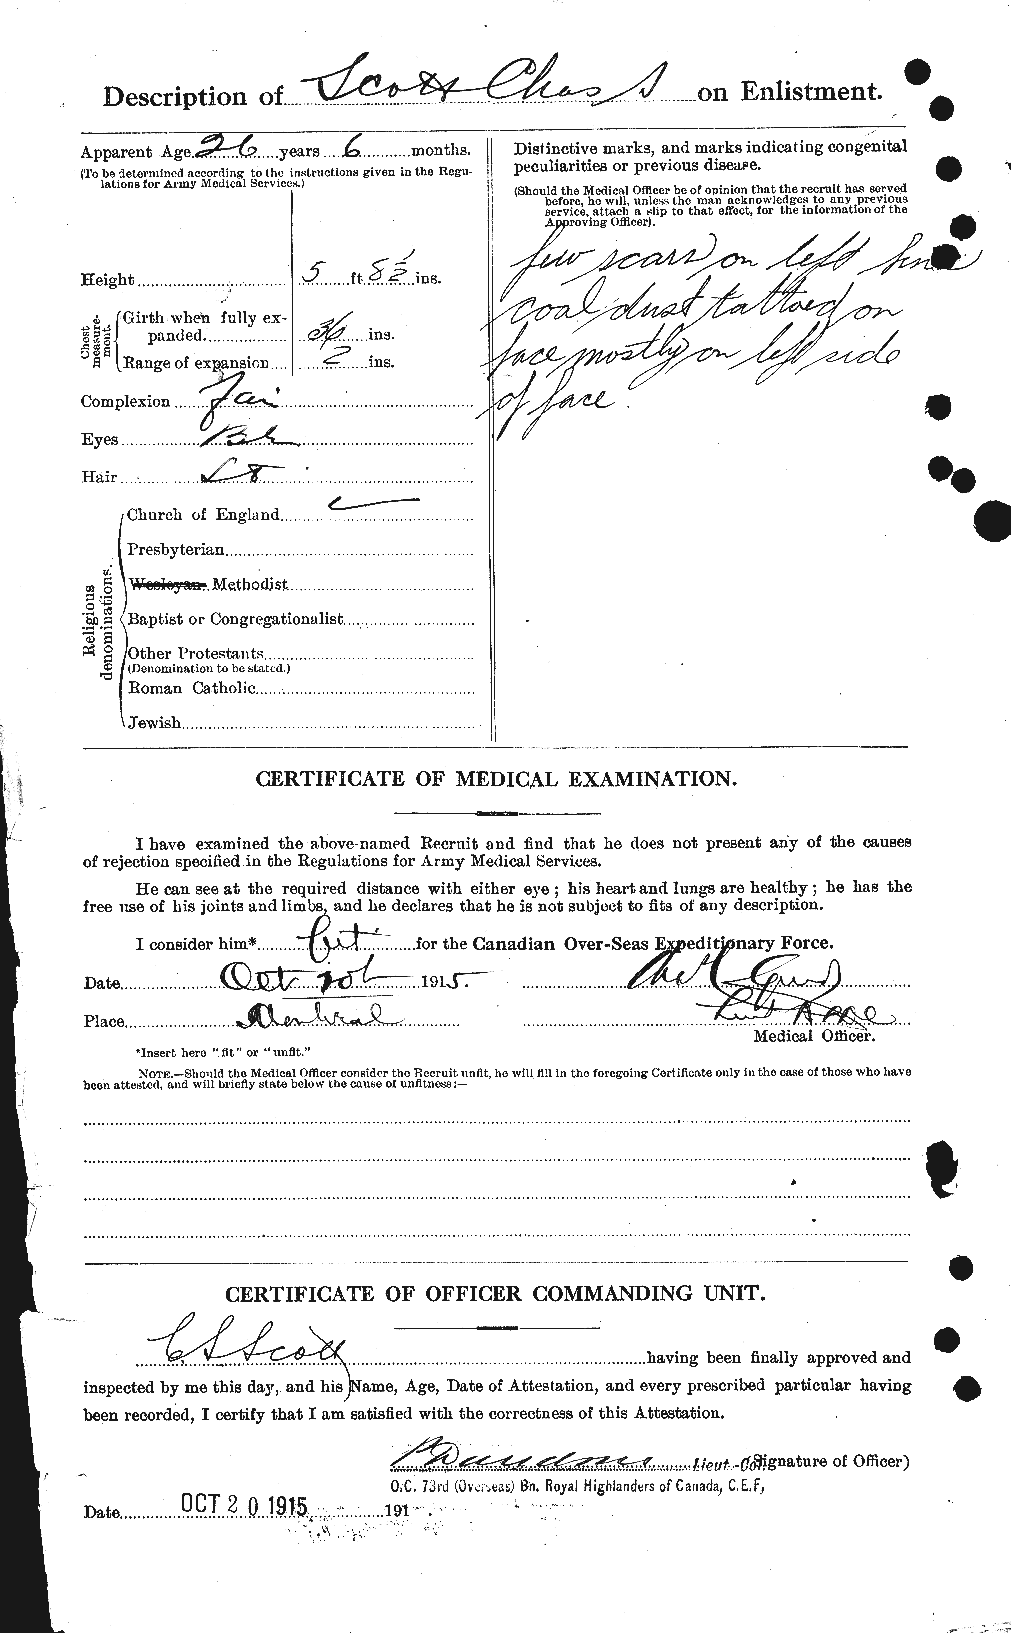 Personnel Records of the First World War - CEF 085879b